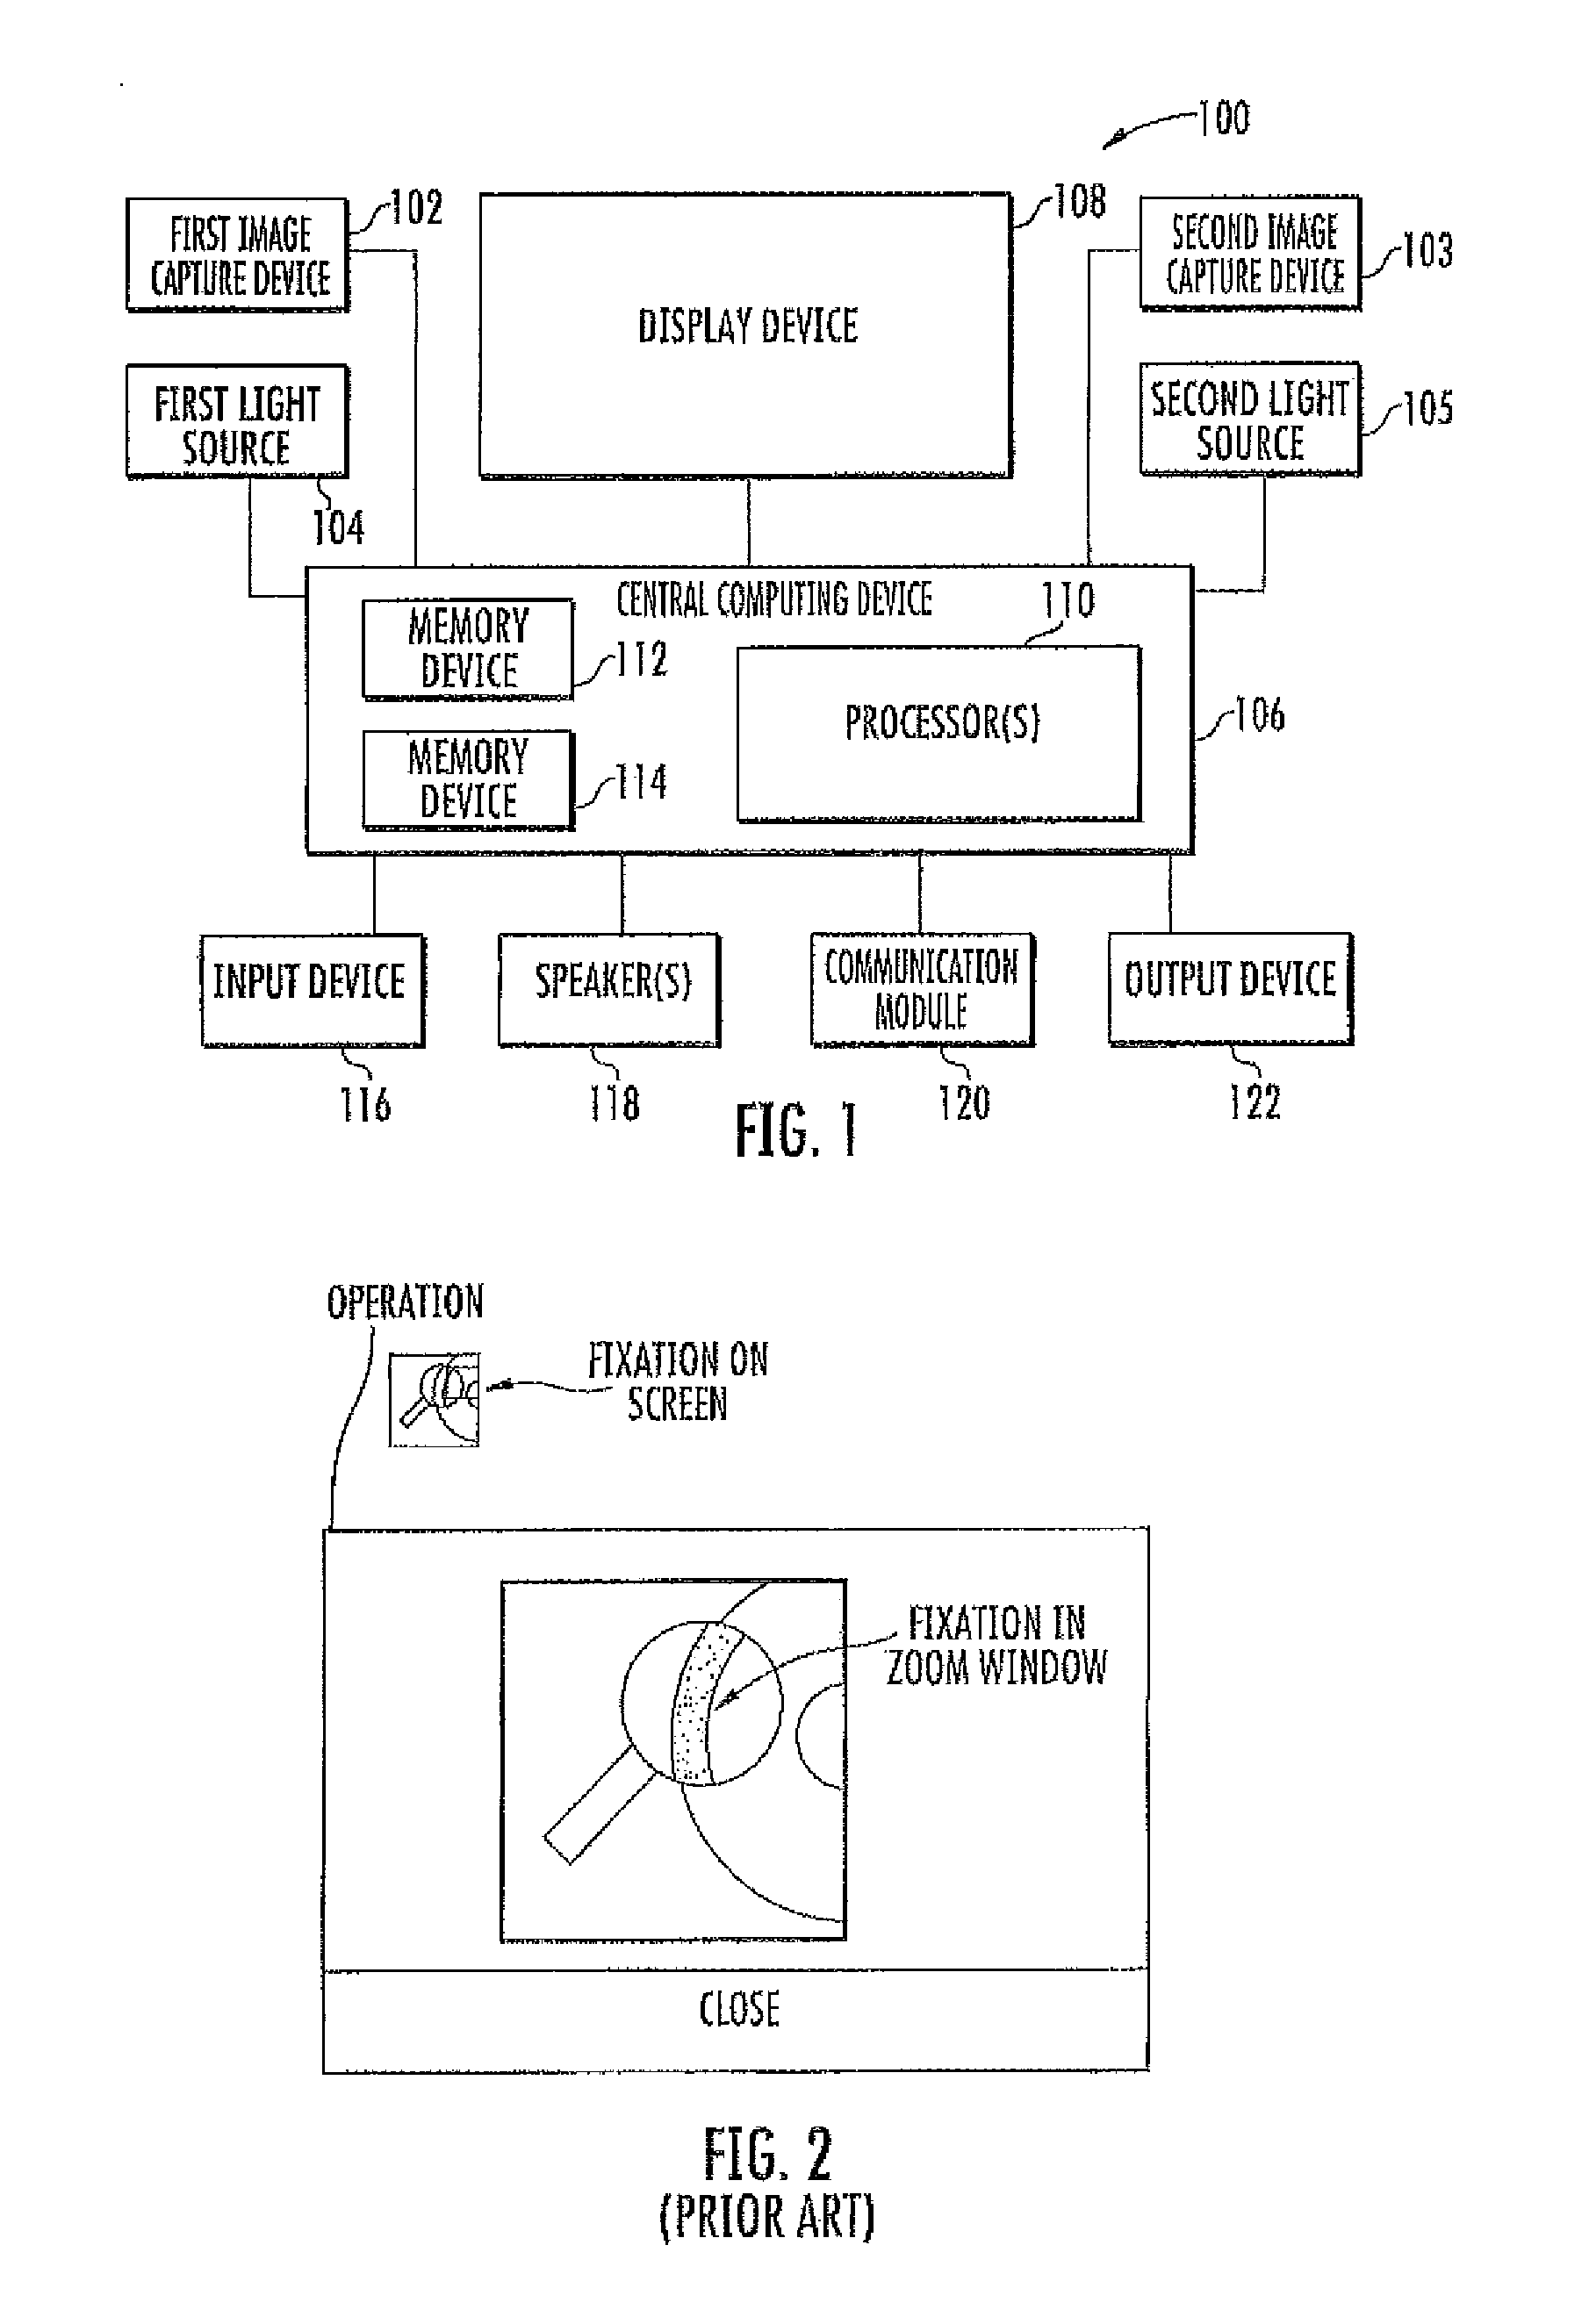 Calibration free, motion tolerant eye-gaze direction detector with contextually aware computer interaction and communication methods